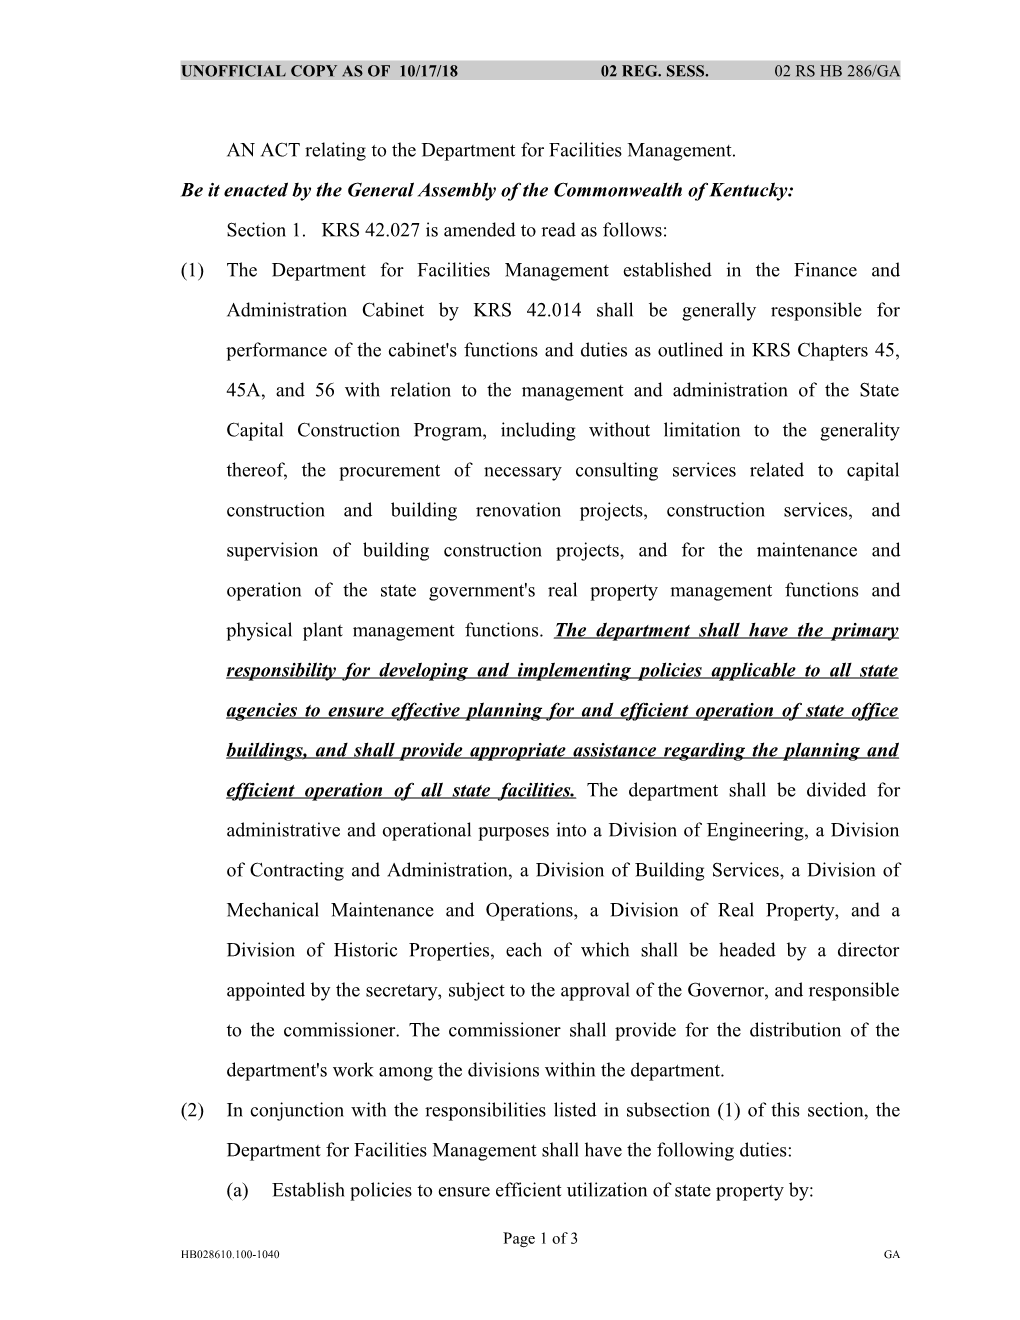 AN ACT Relating to the Department for Facilities Management